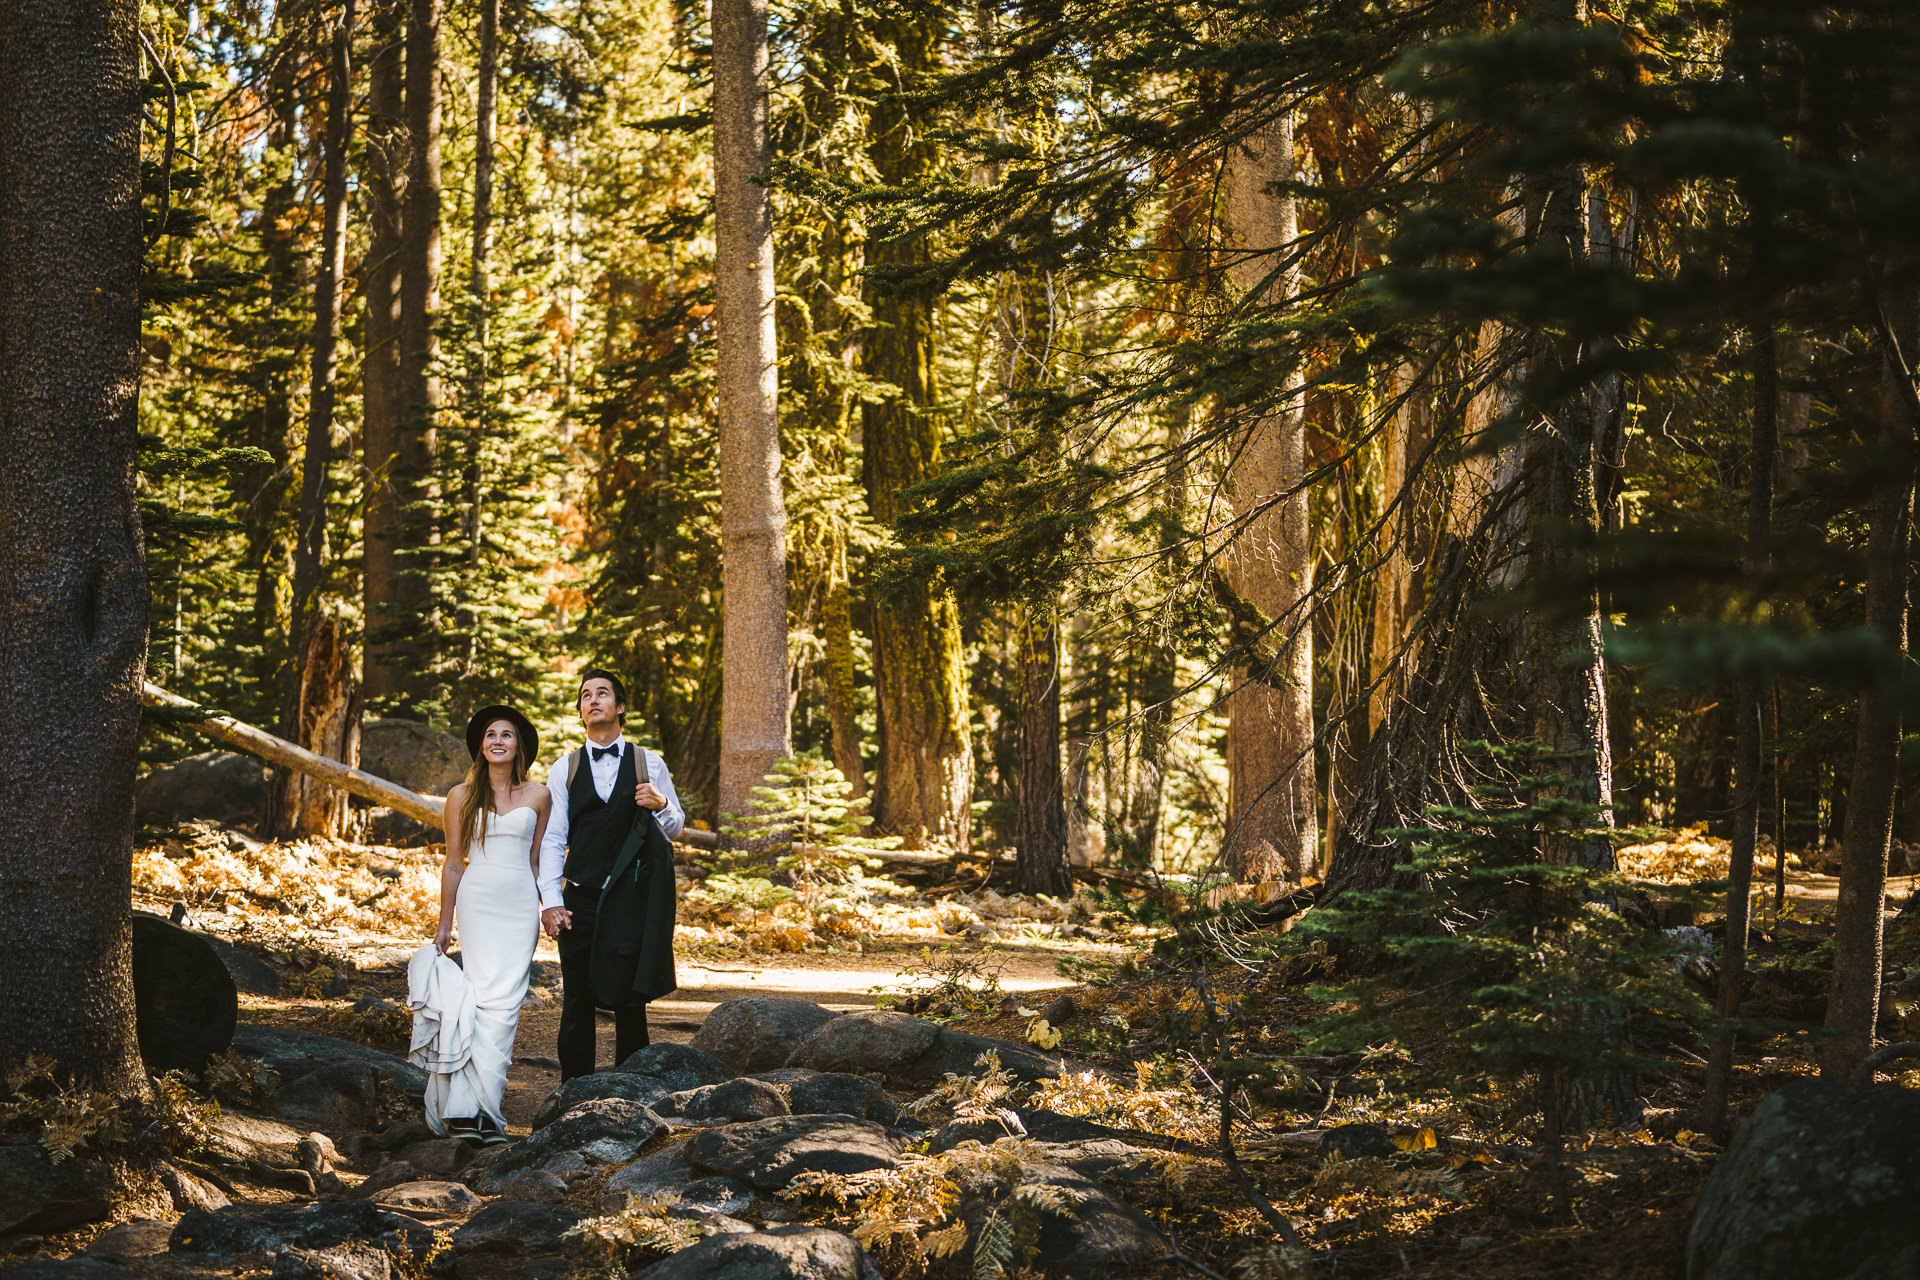 Couple heading to their elopement adventure wedding at Taft's Point in Yosemite California